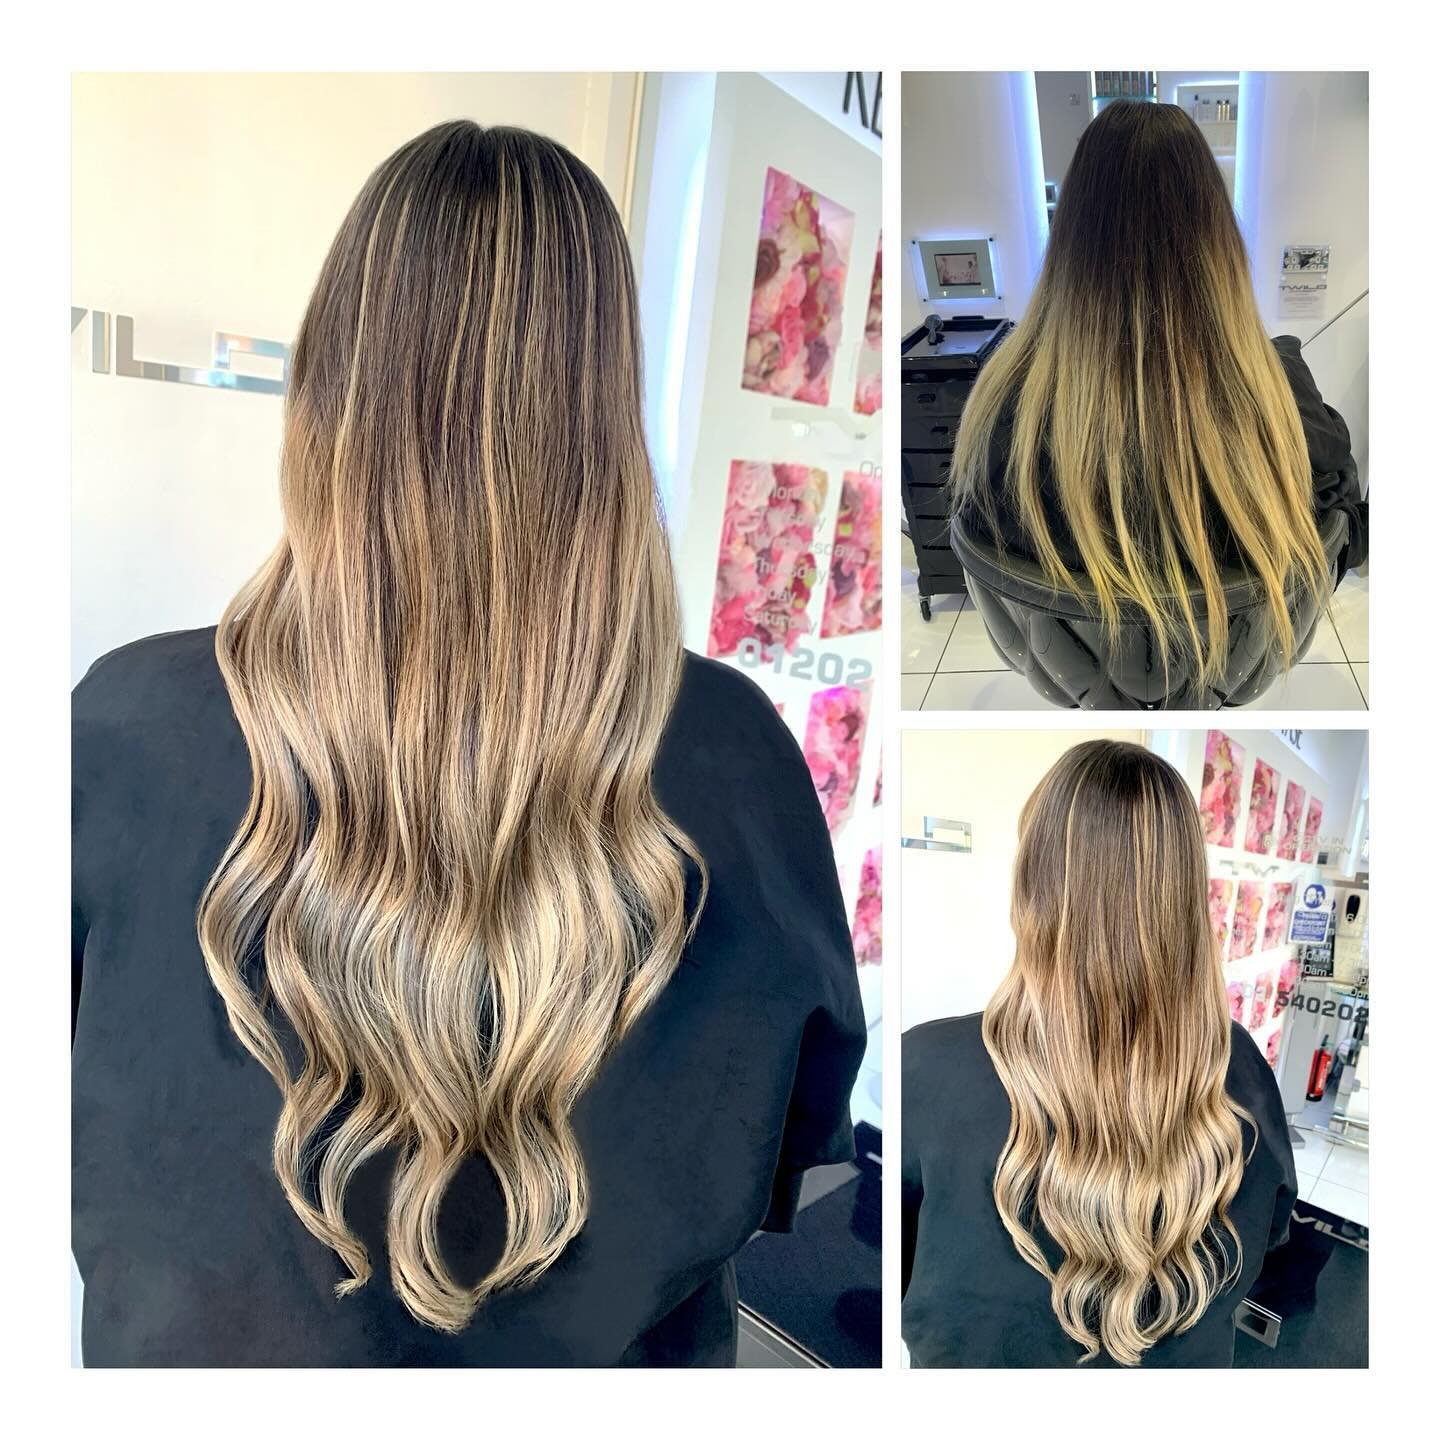 | H o n e y &amp;  W a l n u t  B r o n d e |  Bring us winter with some warmth &hellip; We absolutely love a stunningly, healthy-looking makeover with rich, warm hues for a subtle, multi-tonal glow ♡︎

Hair by Steph

#LicenceToCreate  #AskForWella  